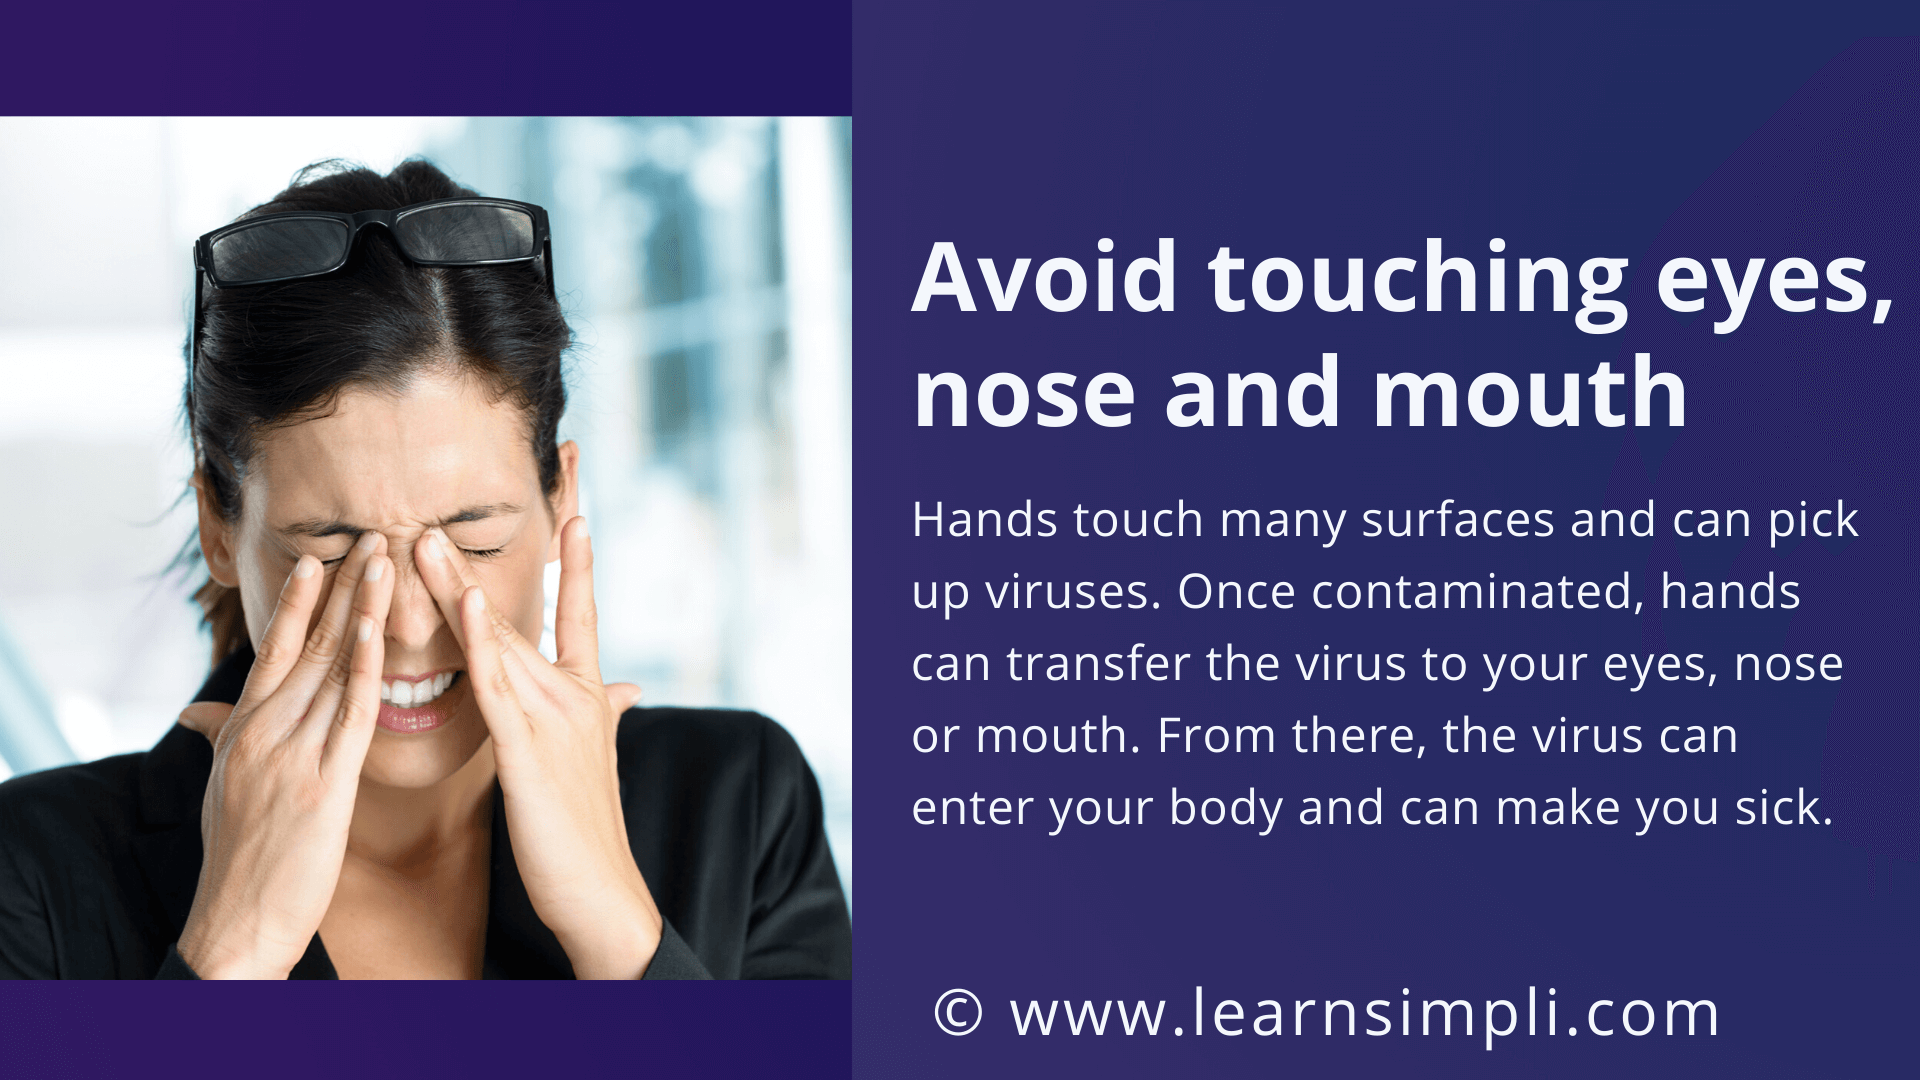 Avoid touching eyes, nose and mouth